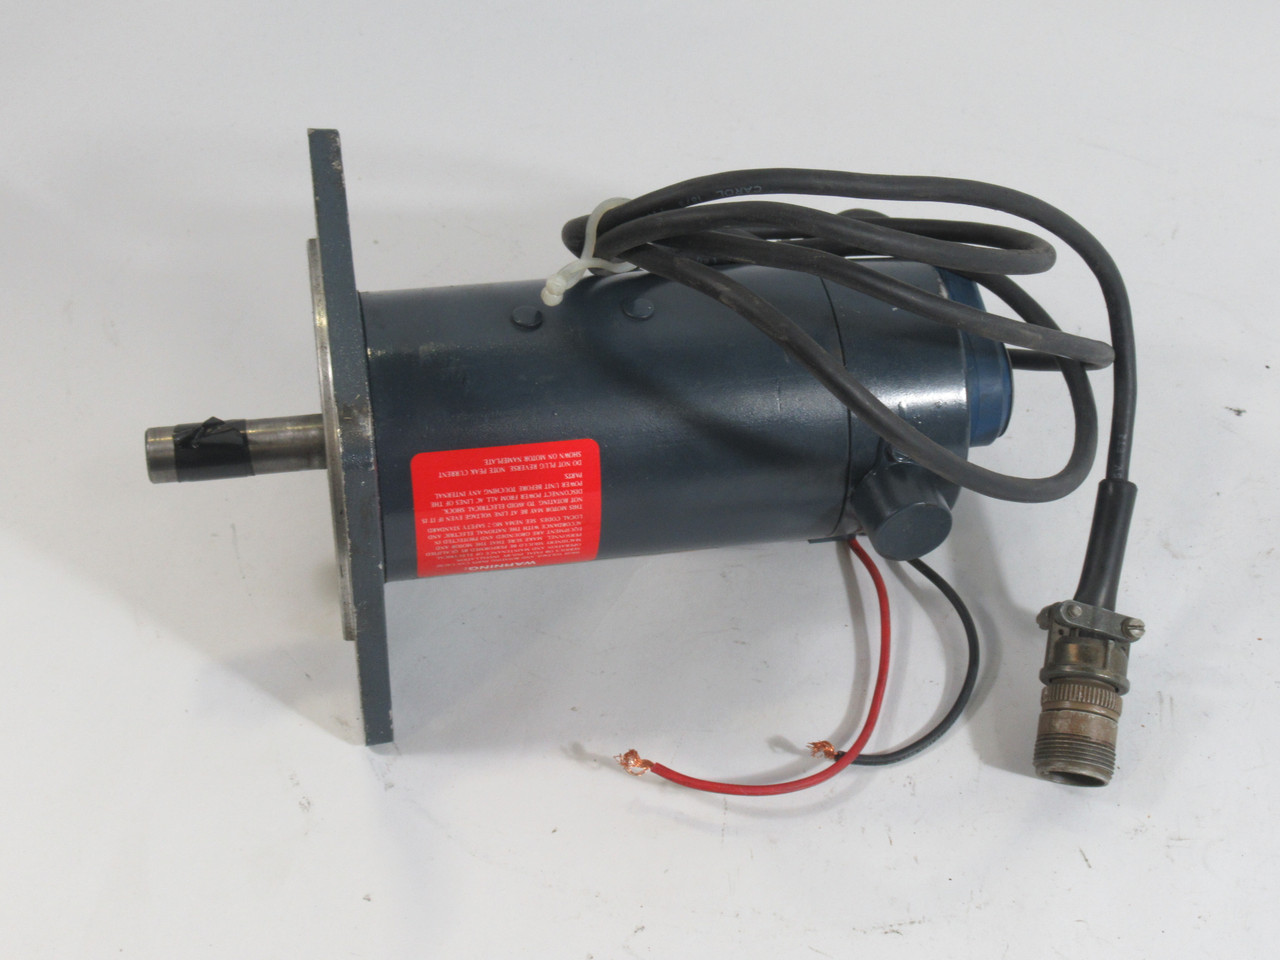 AO Smith 22200000 Variable Speed DC Motor 1/8HP 1725RPM 90V 1.46A USED